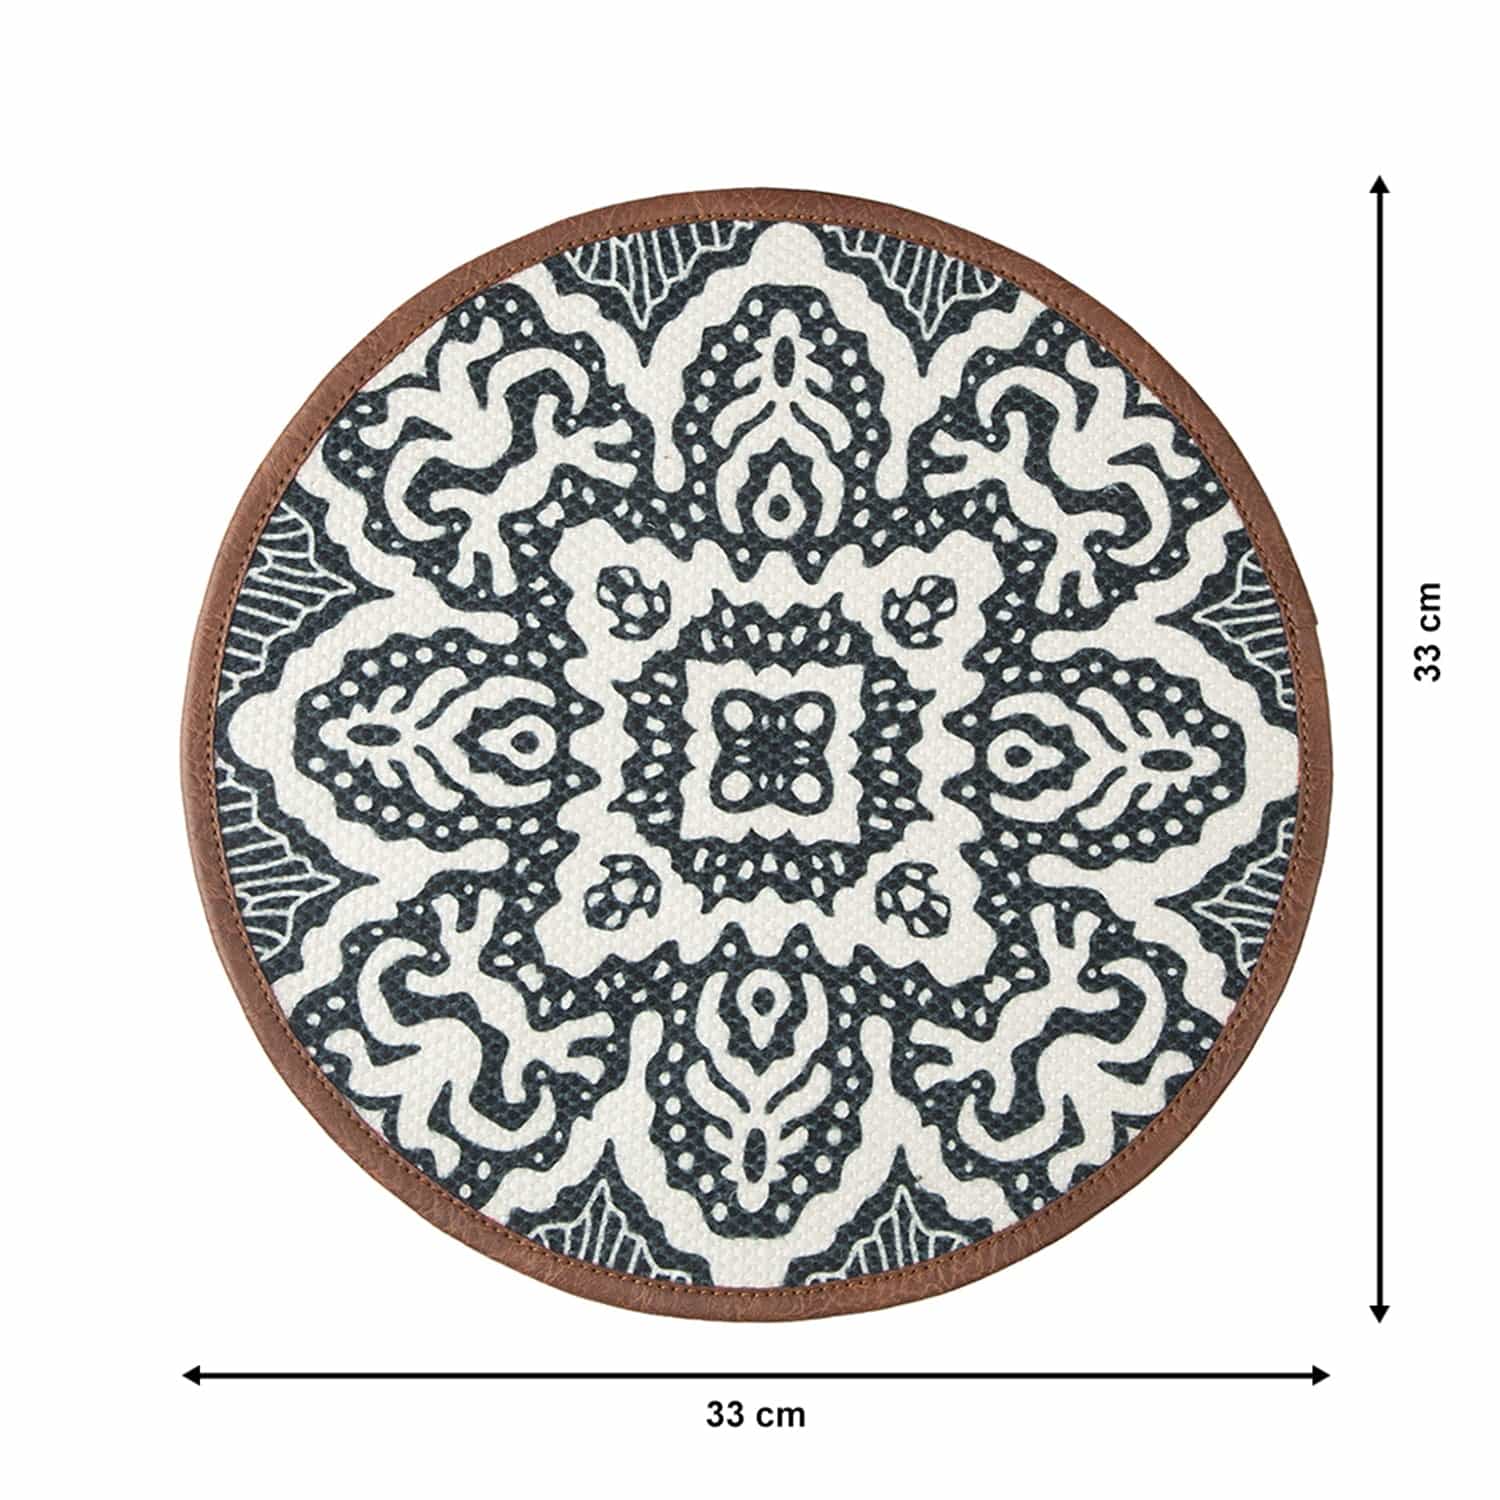 Mona B Set of 2 Printed Mosaic Placemats, 13 INCH Round, Best for Bed-Side Table/Center Table, Dining Table/Shelves (Medallion) - Placemat by Mona-B - Backpack, Flat30, New Arrivals, Sale, Shop1999, Shop2999, Shop3999